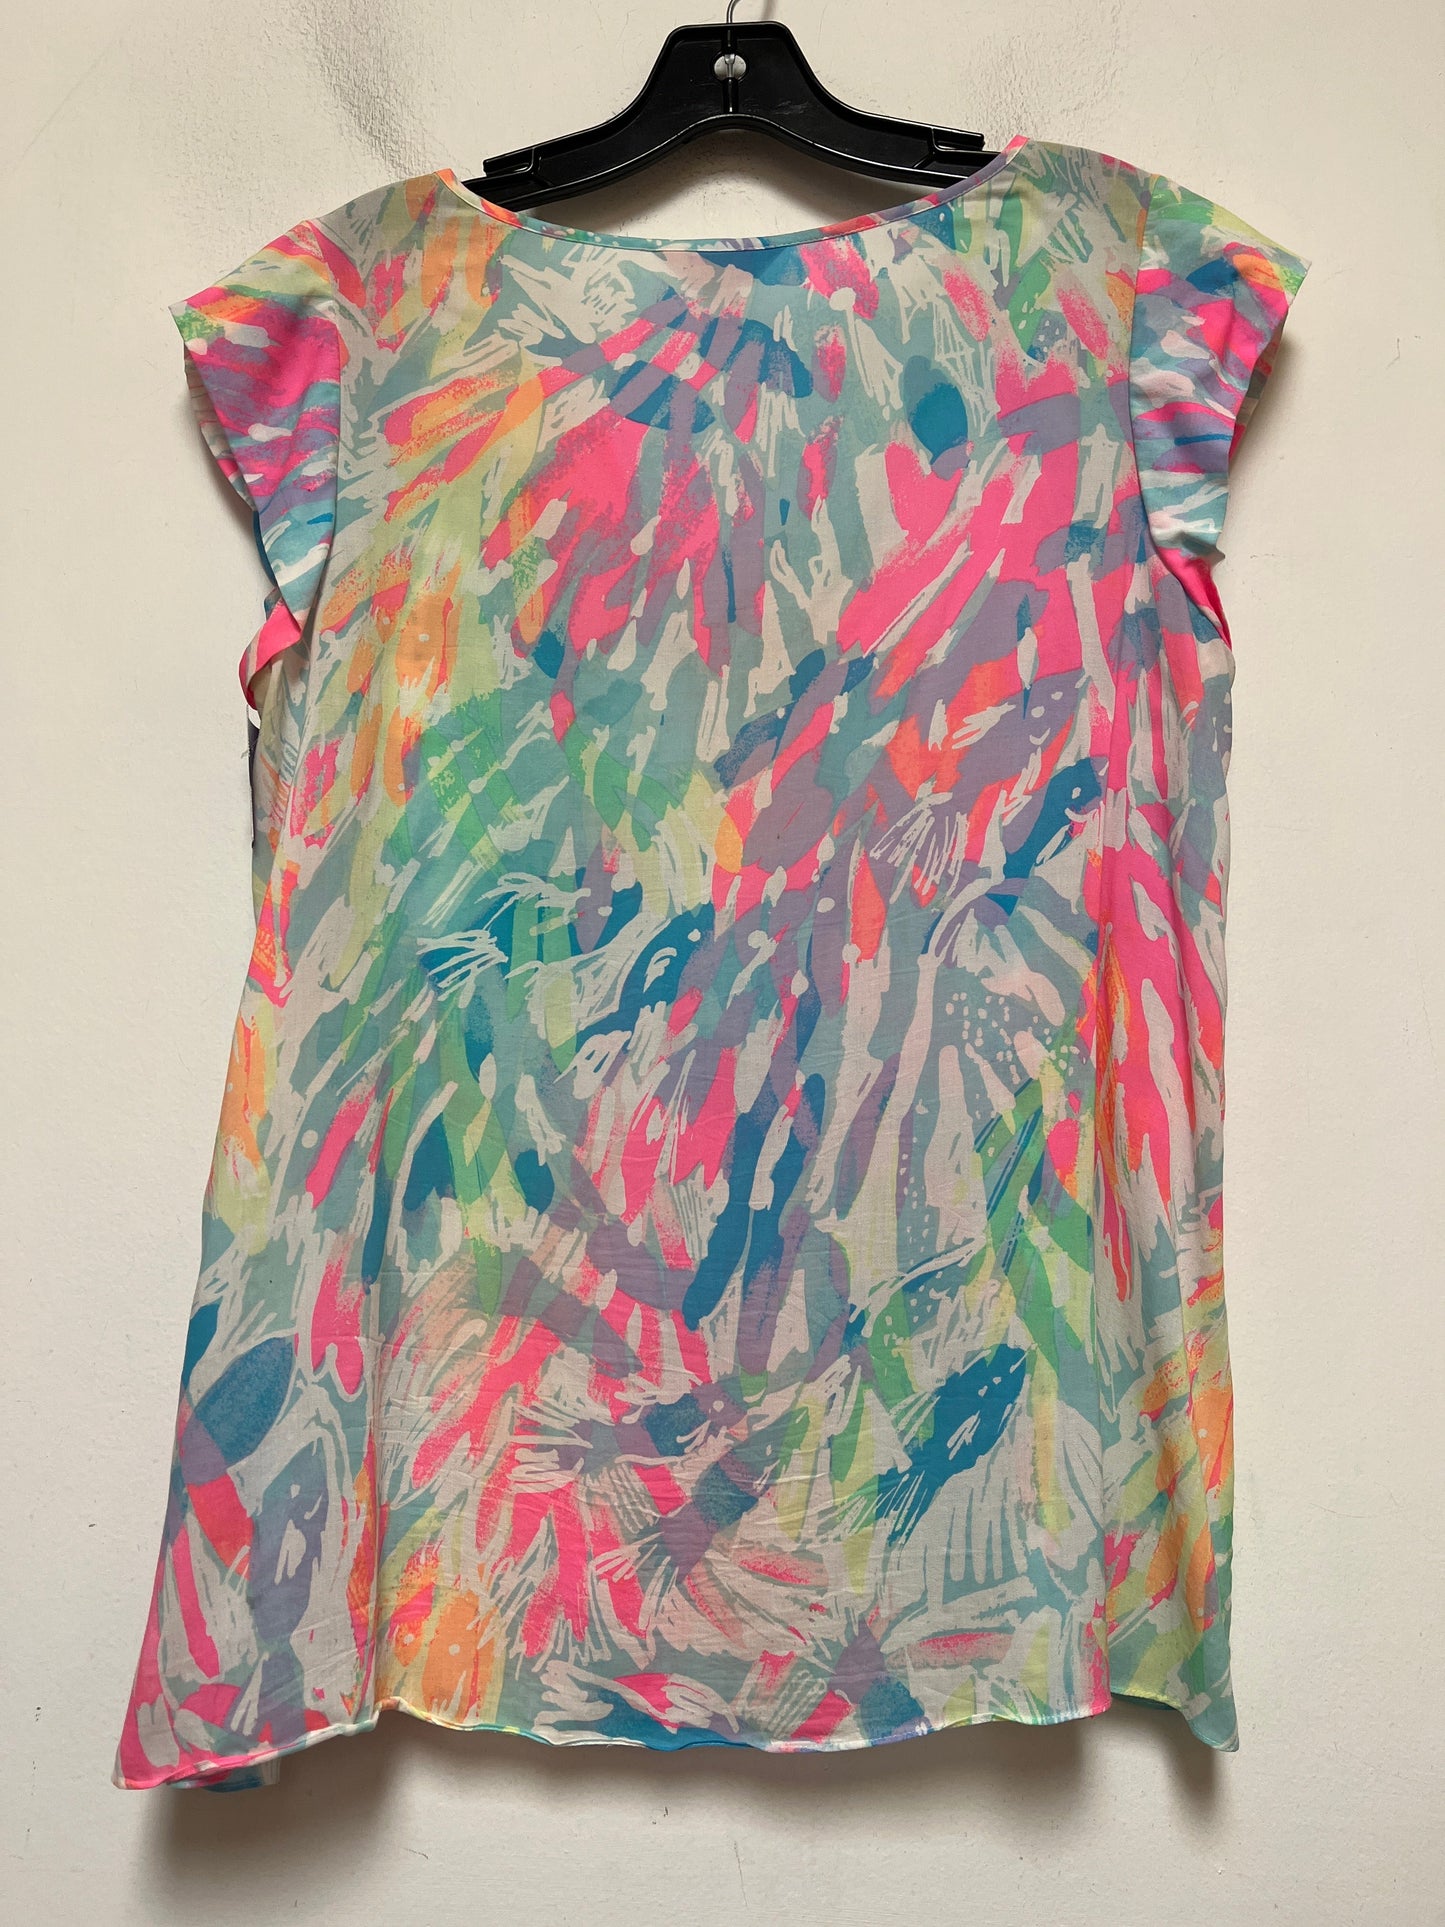 Multi-colored Top Sleeveless Lilly Pulitzer, Size Xs